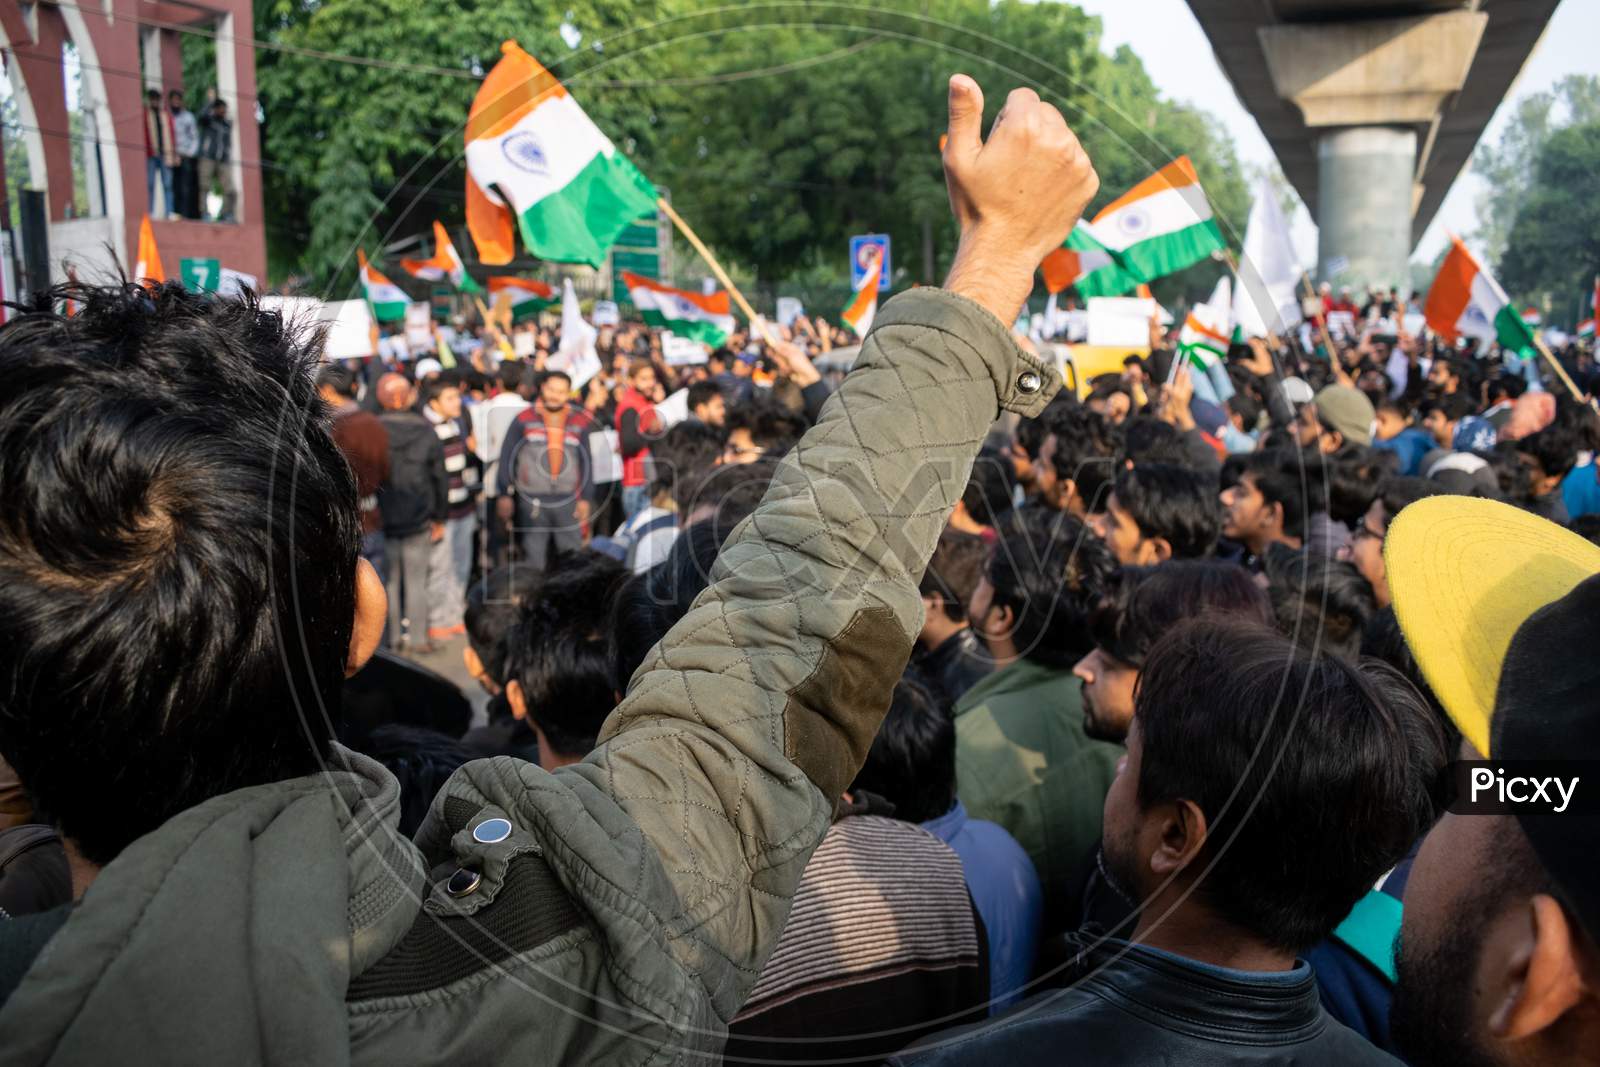 A student with raising hand and People With Indian Flags banners and posters Protesting Against Caa And Nrc Outside Bab E Maulana Abul Kalam Azad Gate No 7 Jamia Millia Islamia A Central University In New Delhi